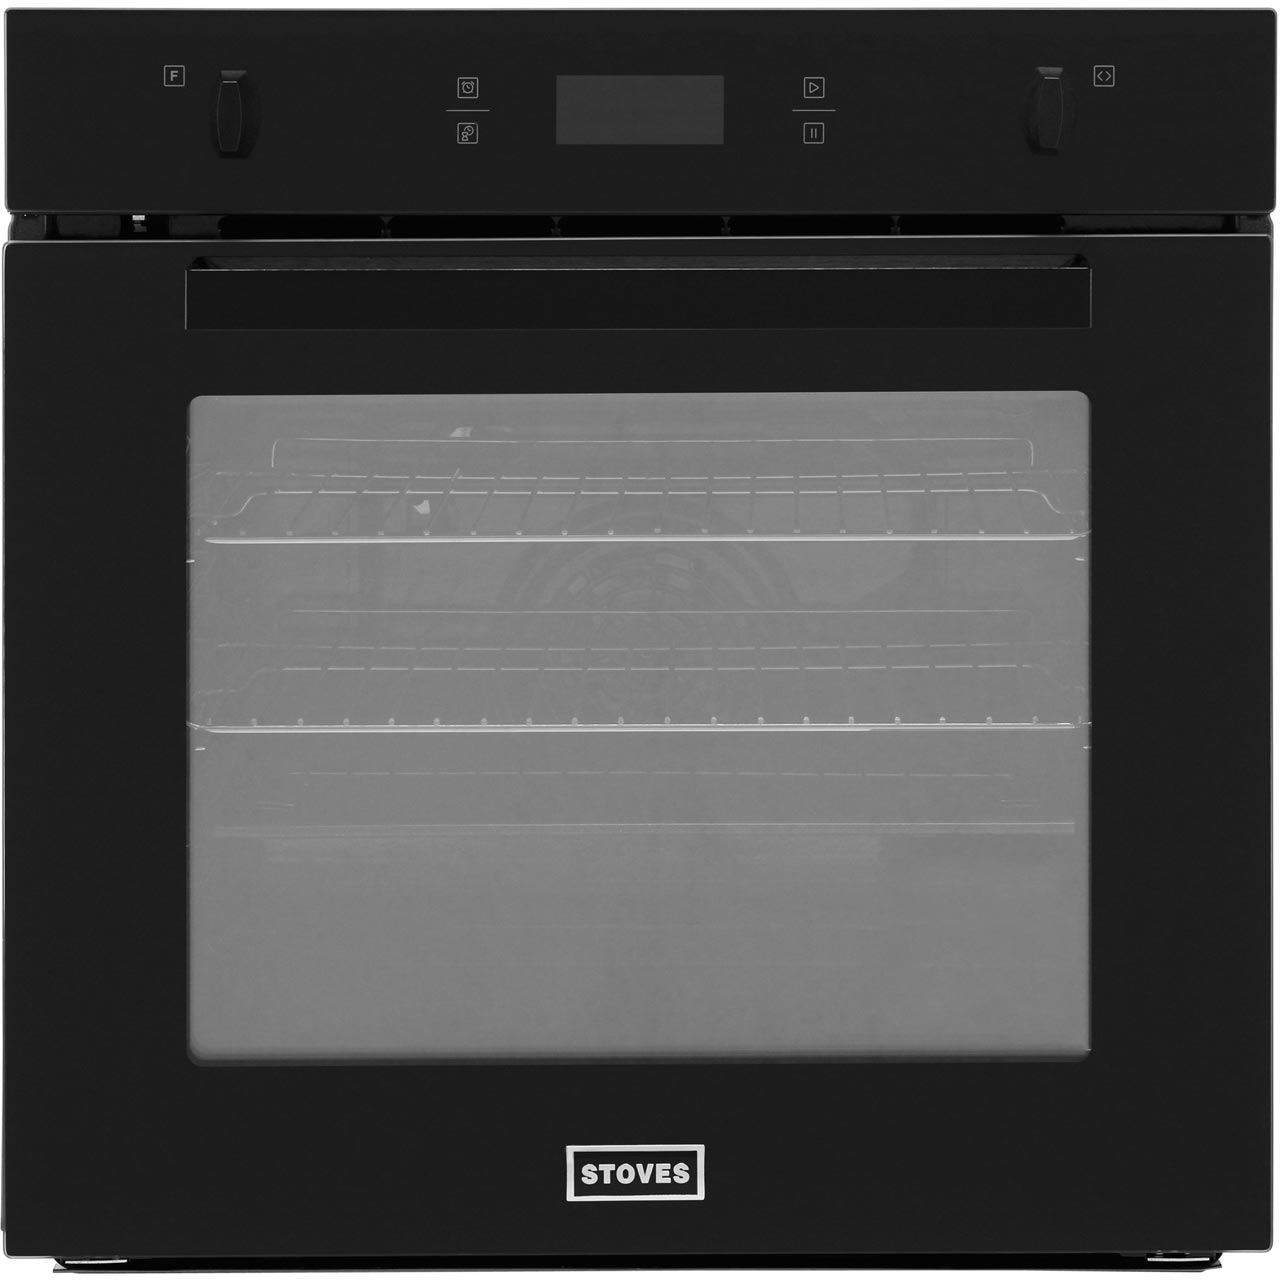 Stoves SEB602PY Built In Electric Single Oven with Pyrolytic Cleaning - Black - A Rated, Black